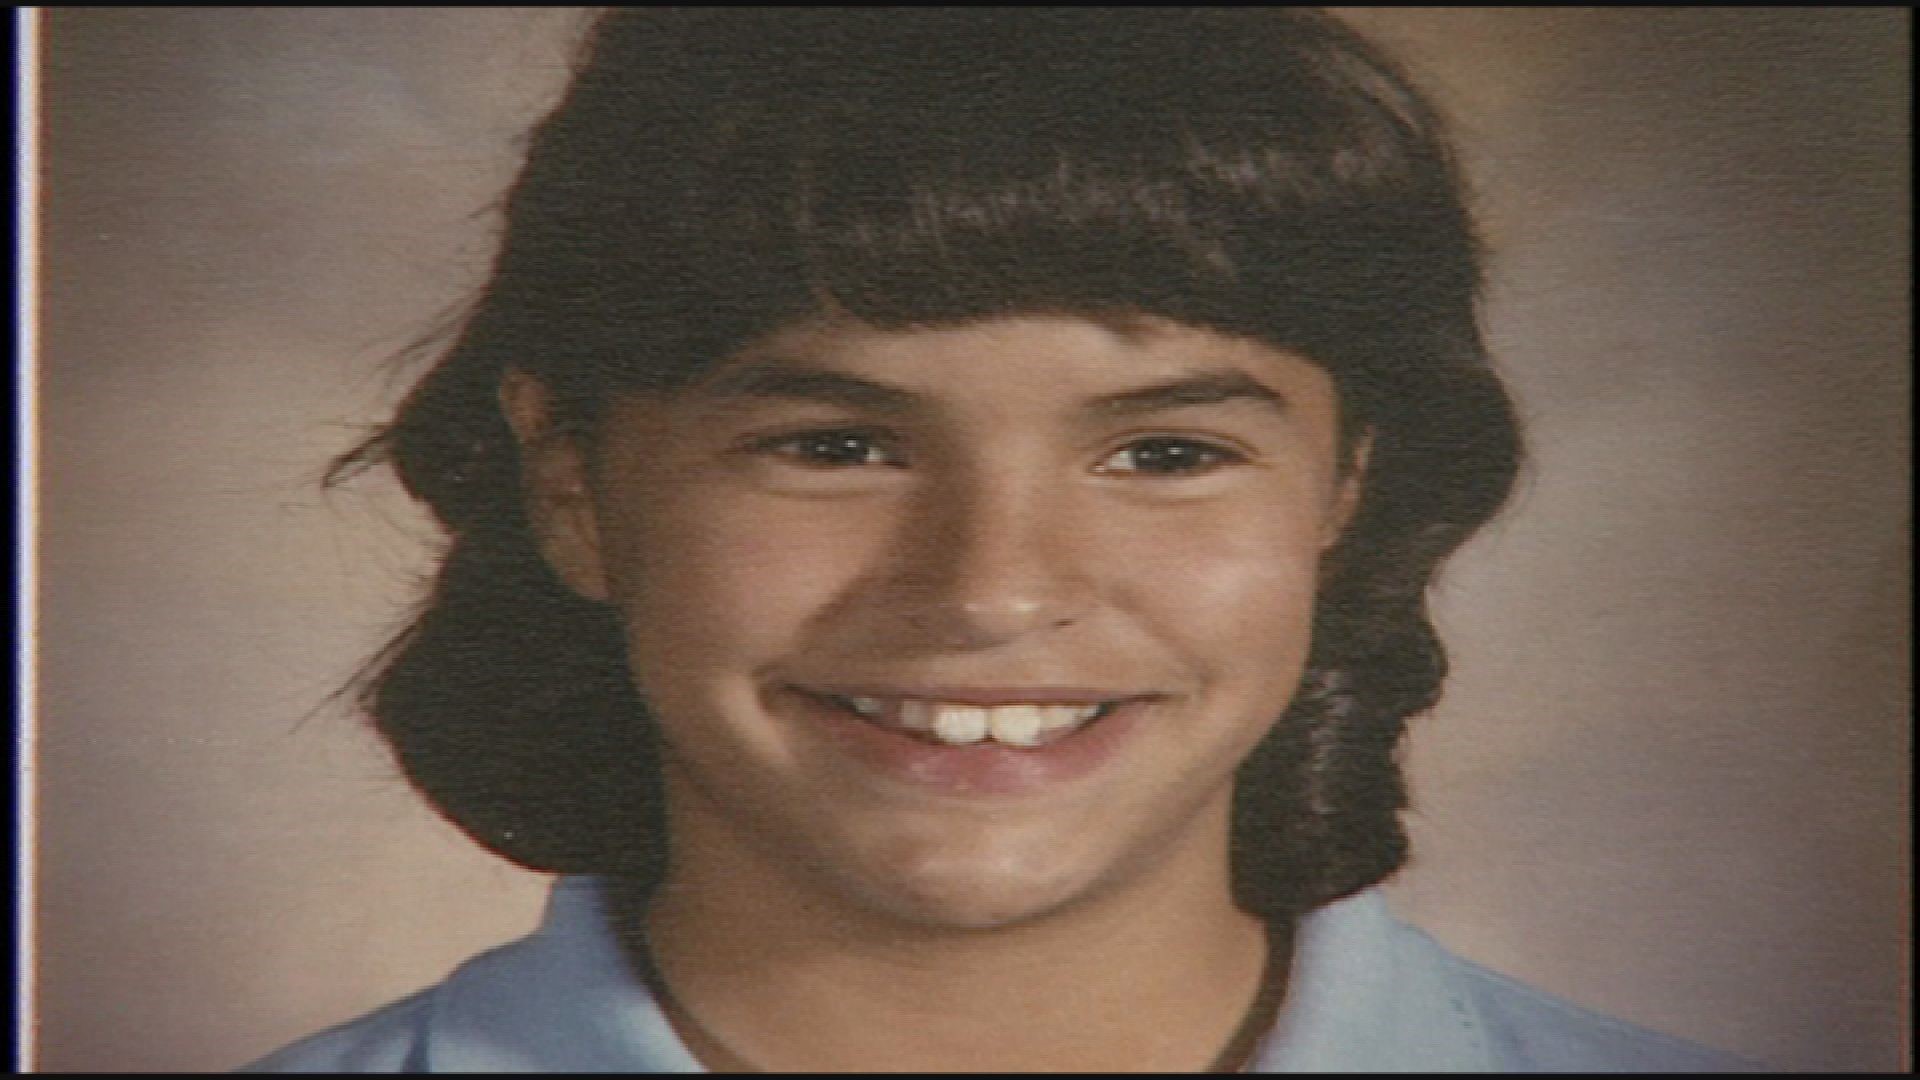 Jonelle Williams was dropped off at home at her Greeley home after a choir concert on Dec. 20, 1984. She hasn't been seen since. Her family held a service ten years after disappearance to say goodbye and try to find some closure.